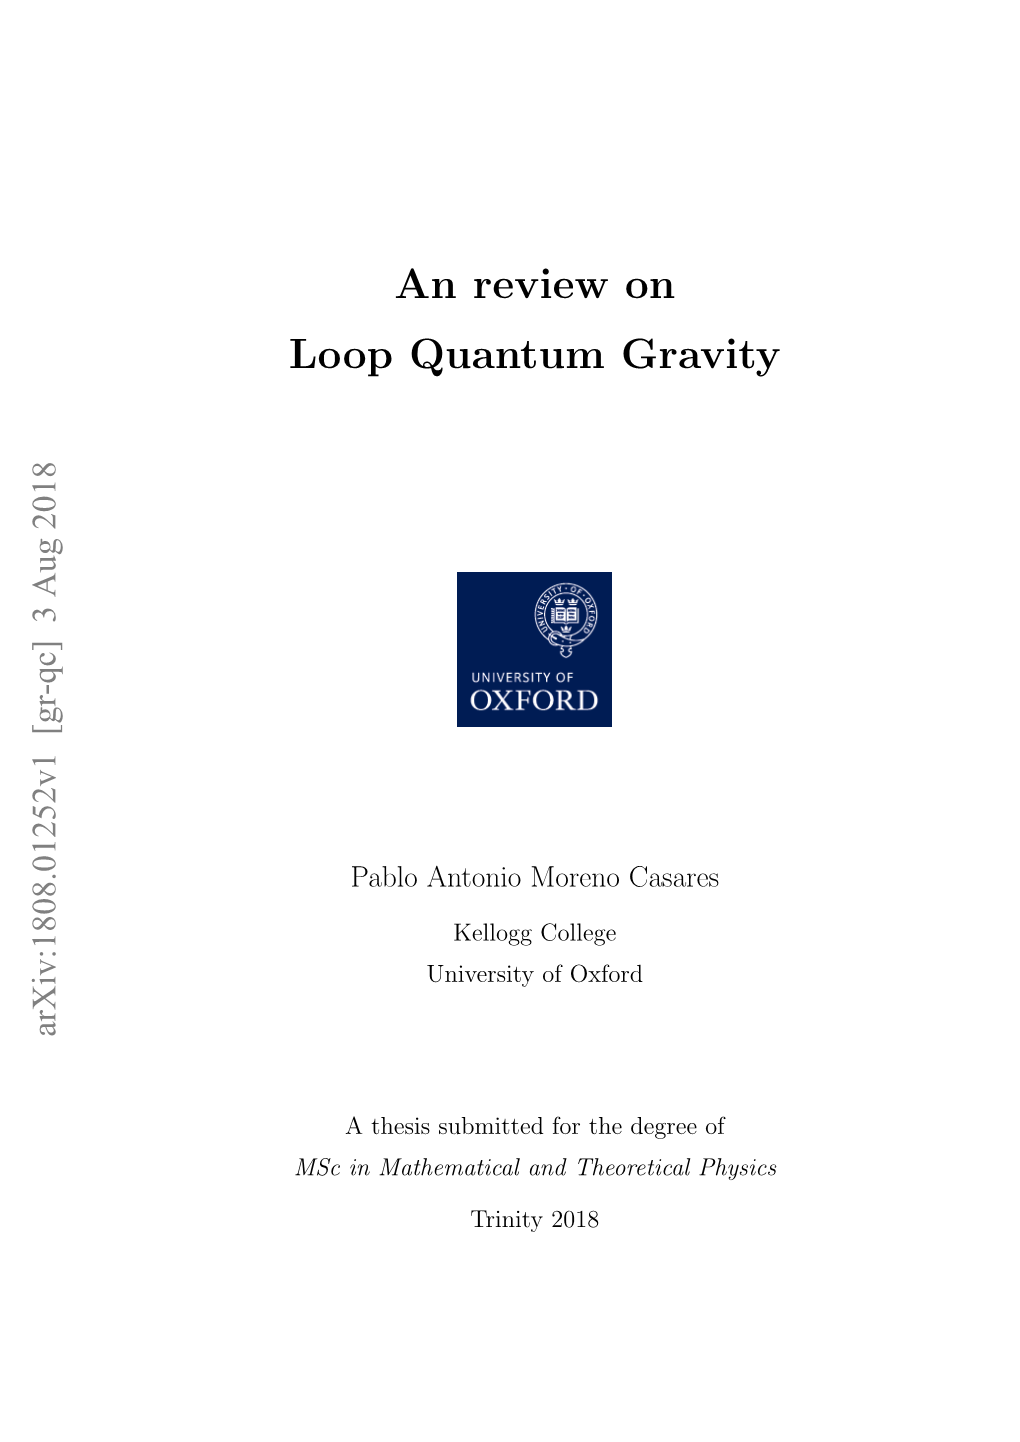 An Review on Loop Quantum Gravity